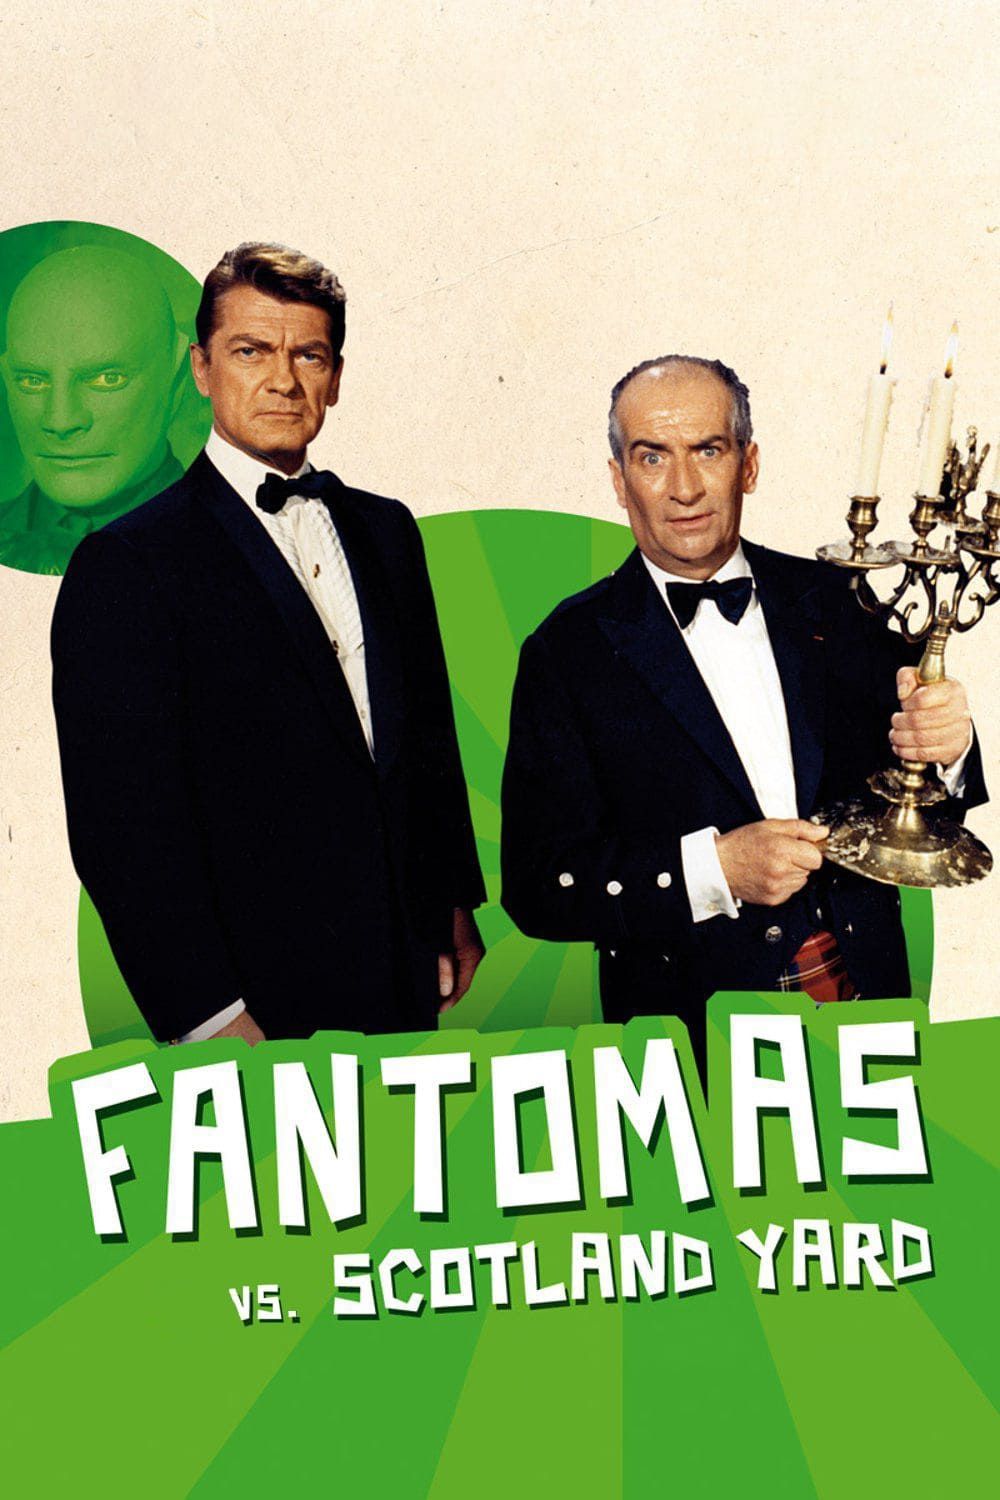 Fantomas DVD 1964 / Directed by André Hunebelle / Starring: Jean